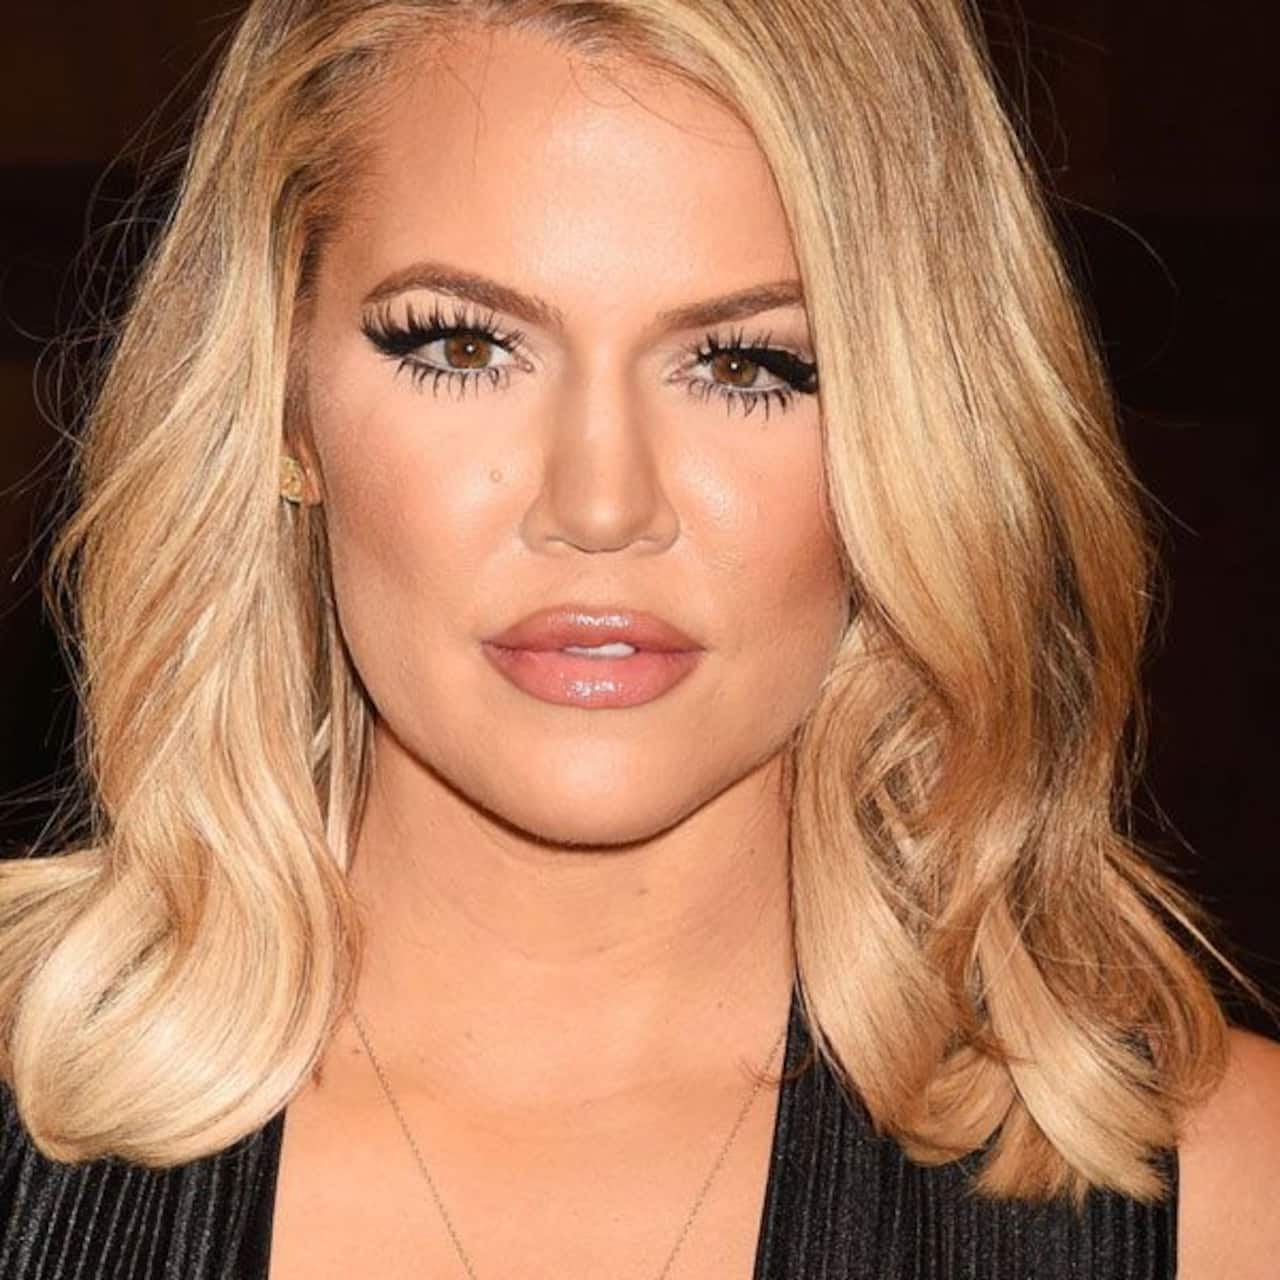 Khloe Kardashian tests positive for COVID-19: I was was vomiting, shaking and having hot and cold flashes